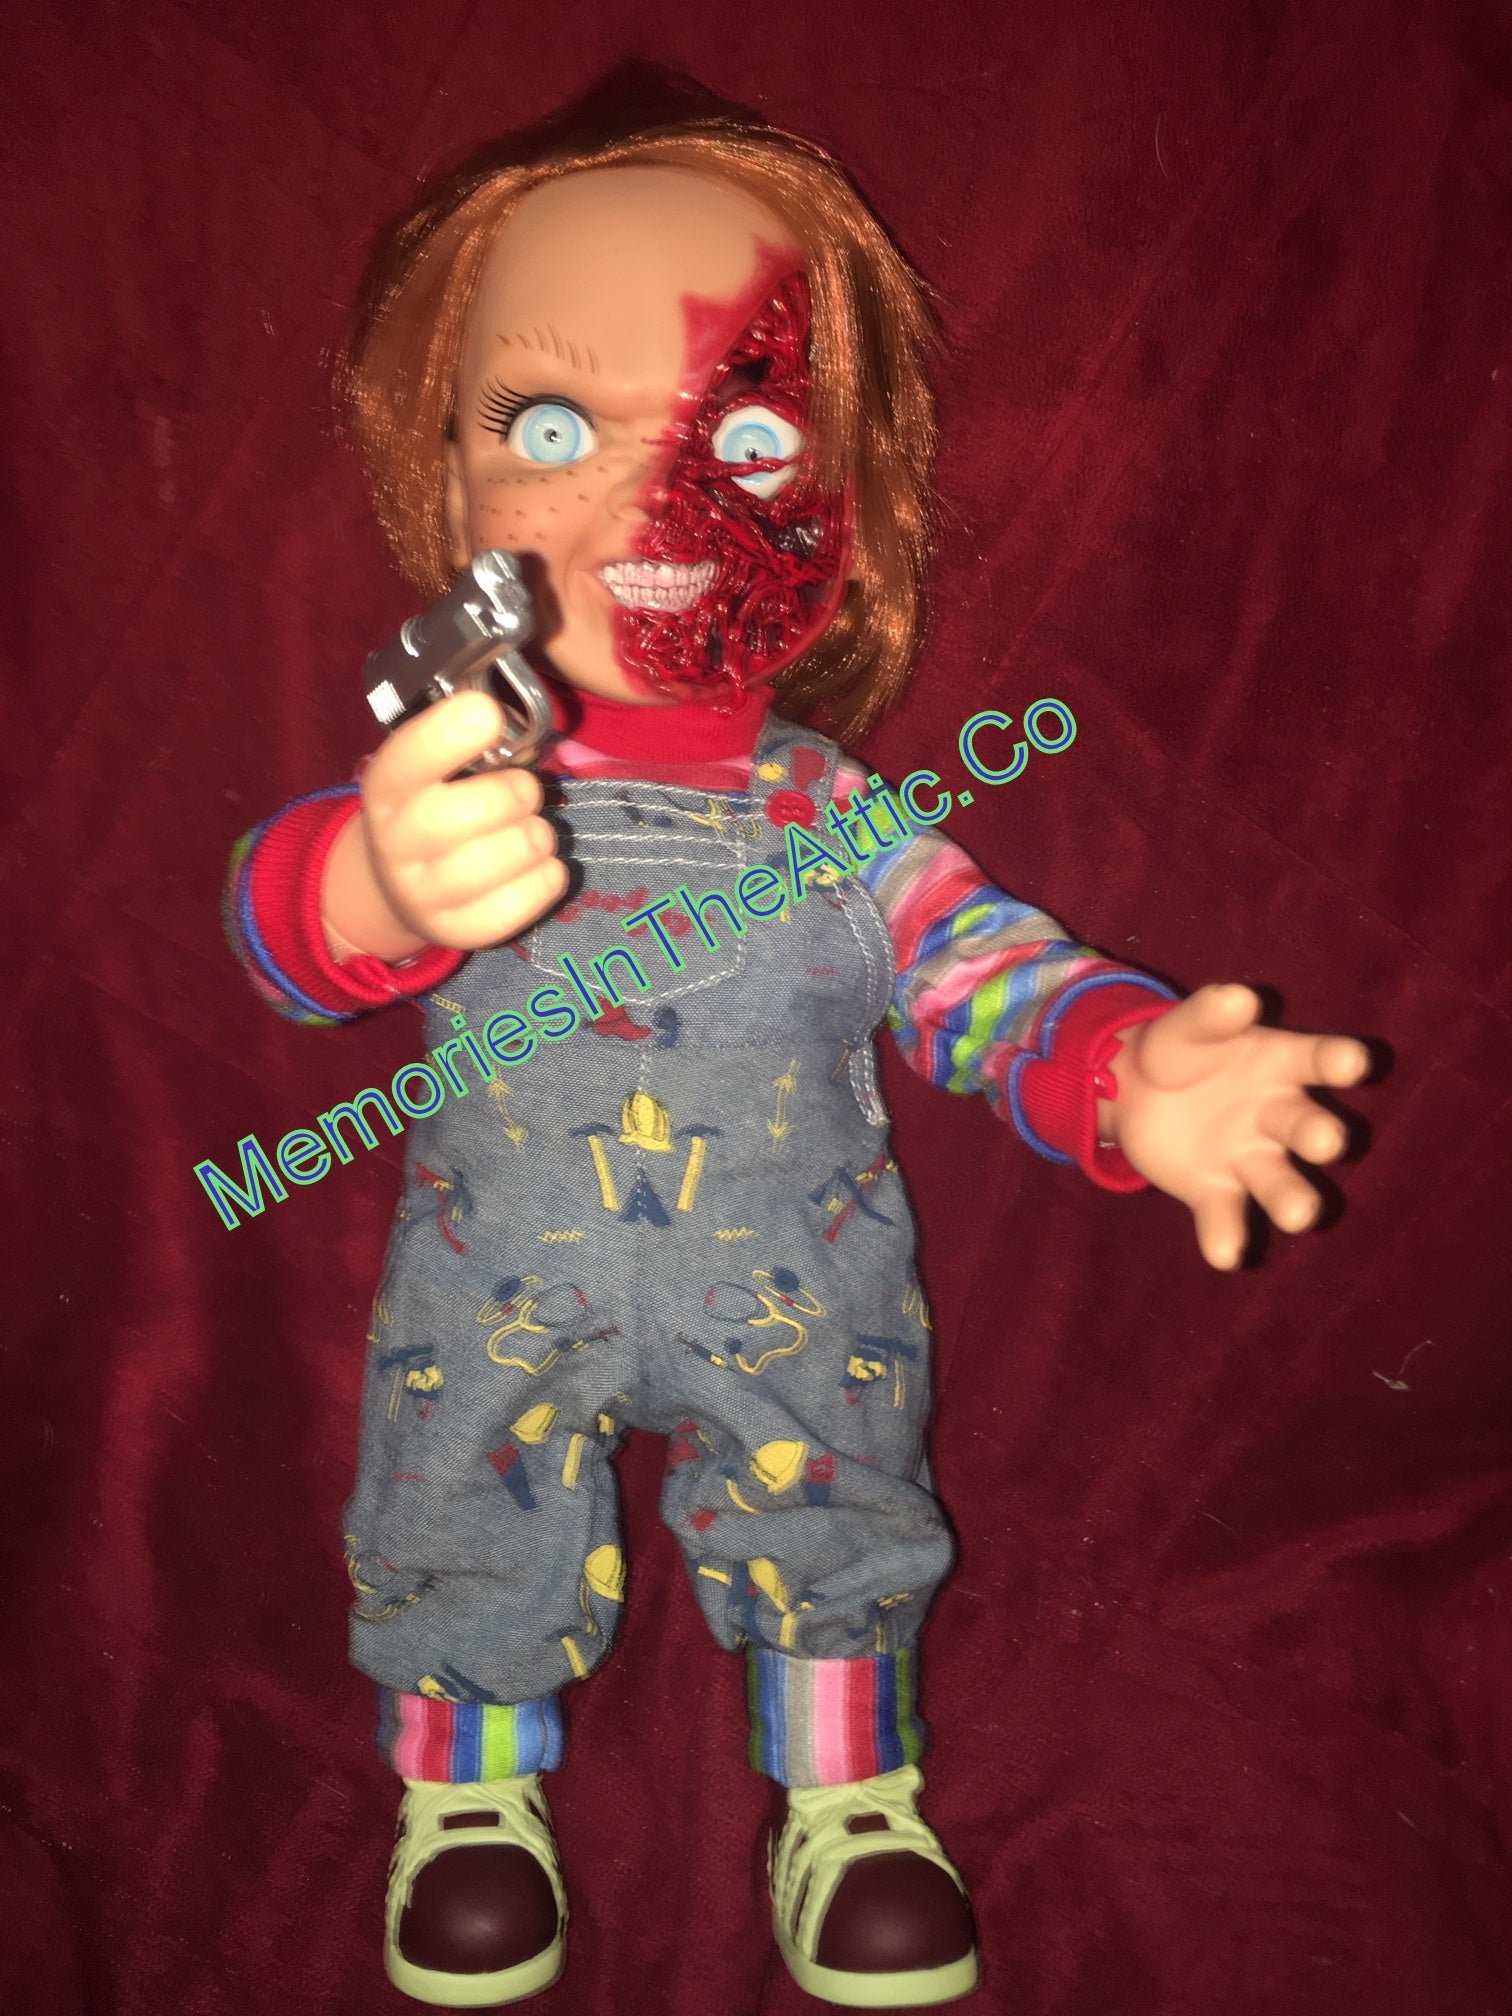 Chucky Blythe pizza face versionのフィギアゲーム・おもちゃ・グッズ ...